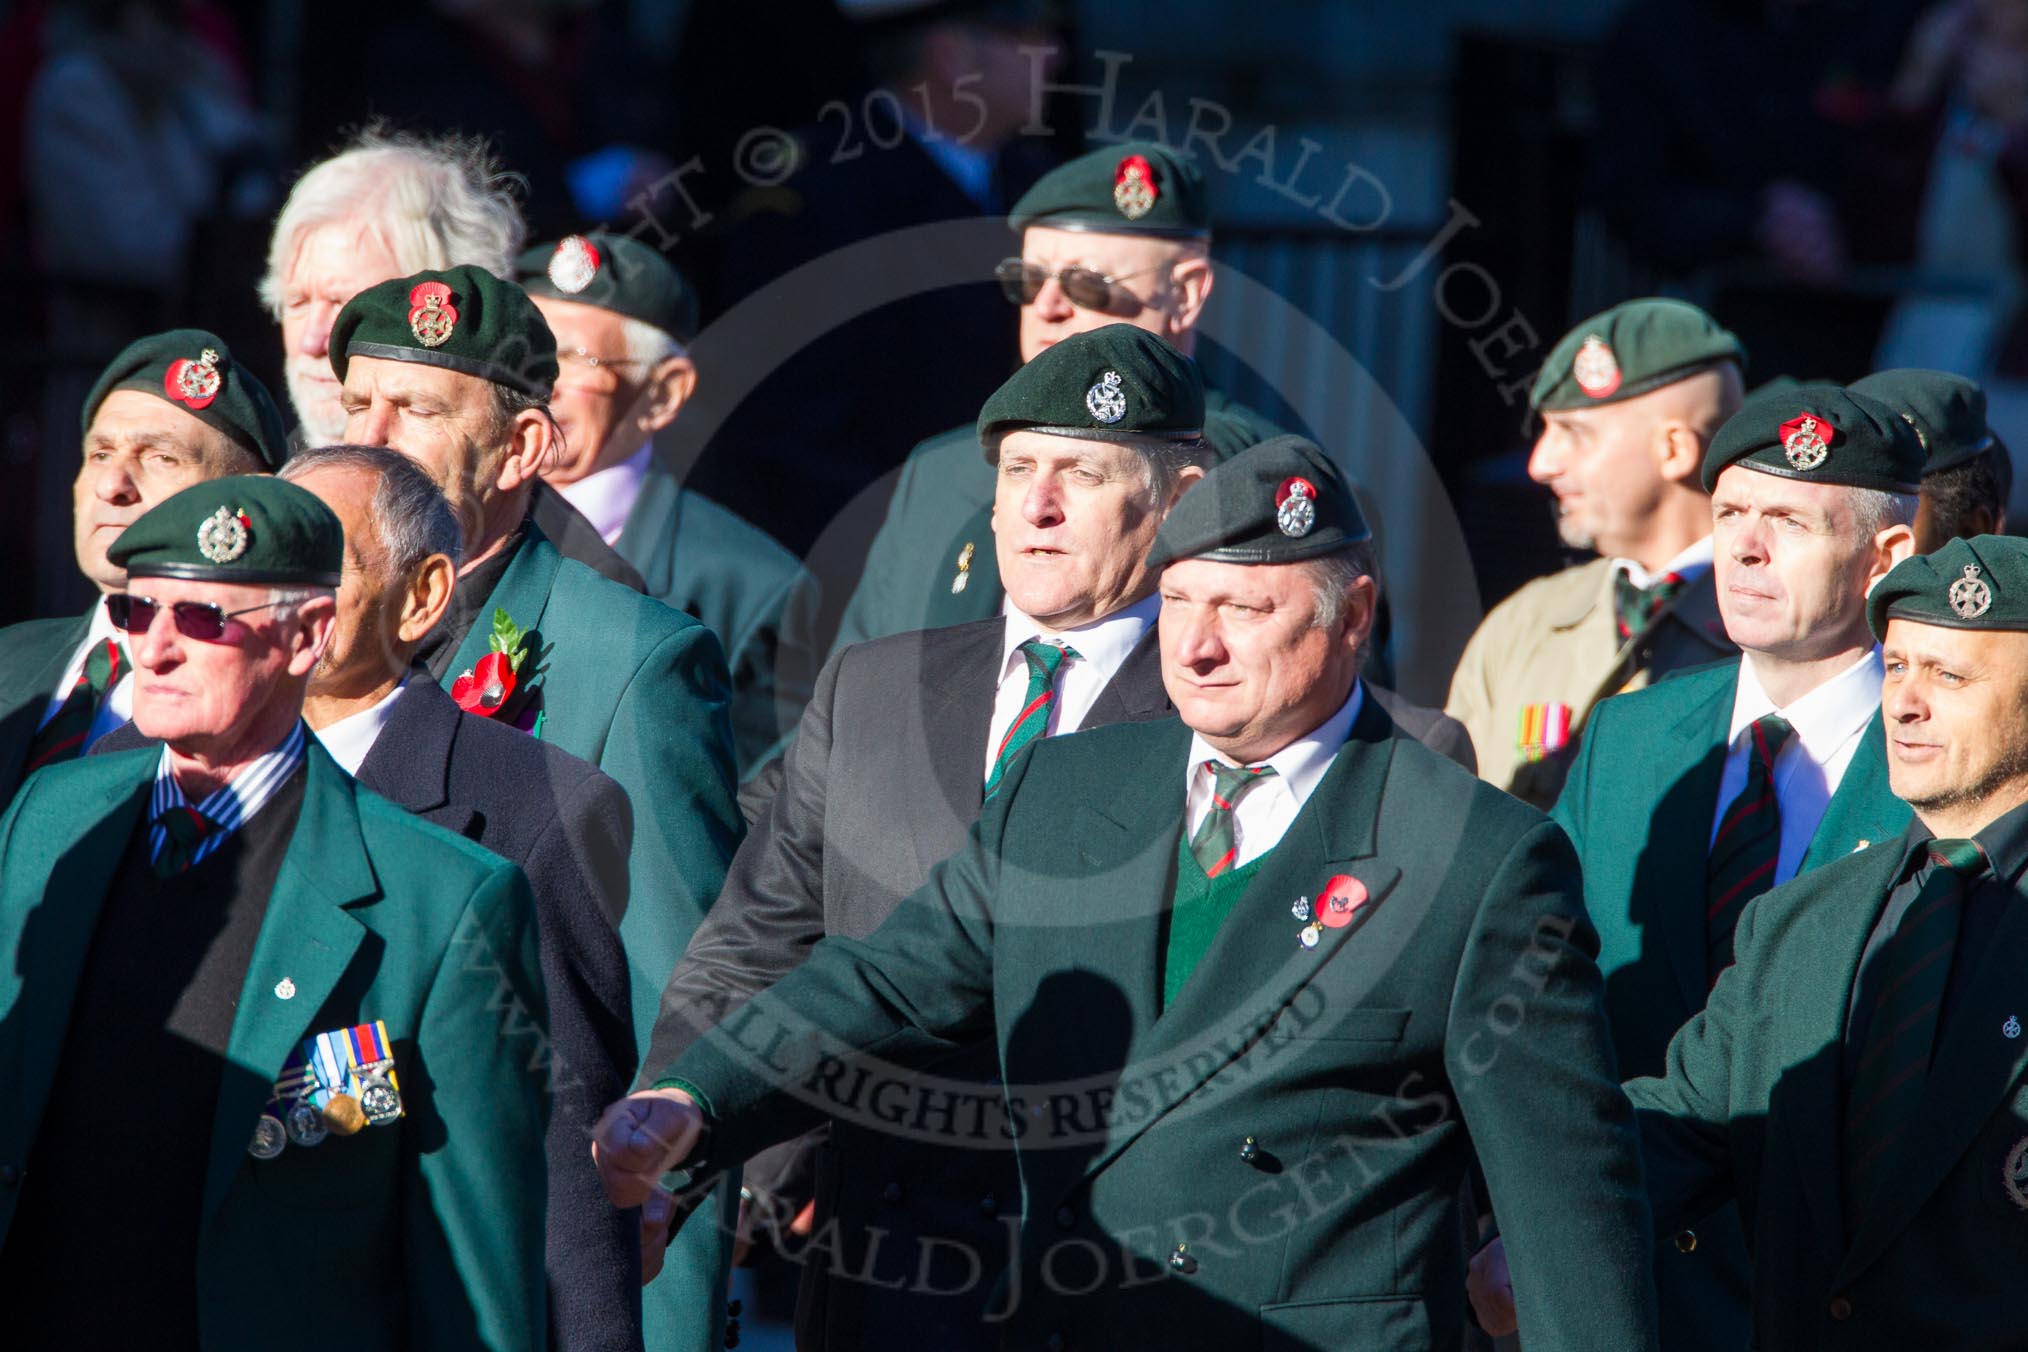 Remembrance Sunday Cenotaph March Past 2013: A16 - Royal Green Jackets Association..
Press stand opposite the Foreign Office building, Whitehall, London SW1,
London,
Greater London,
United Kingdom,
on 10 November 2013 at 11:56, image #1133